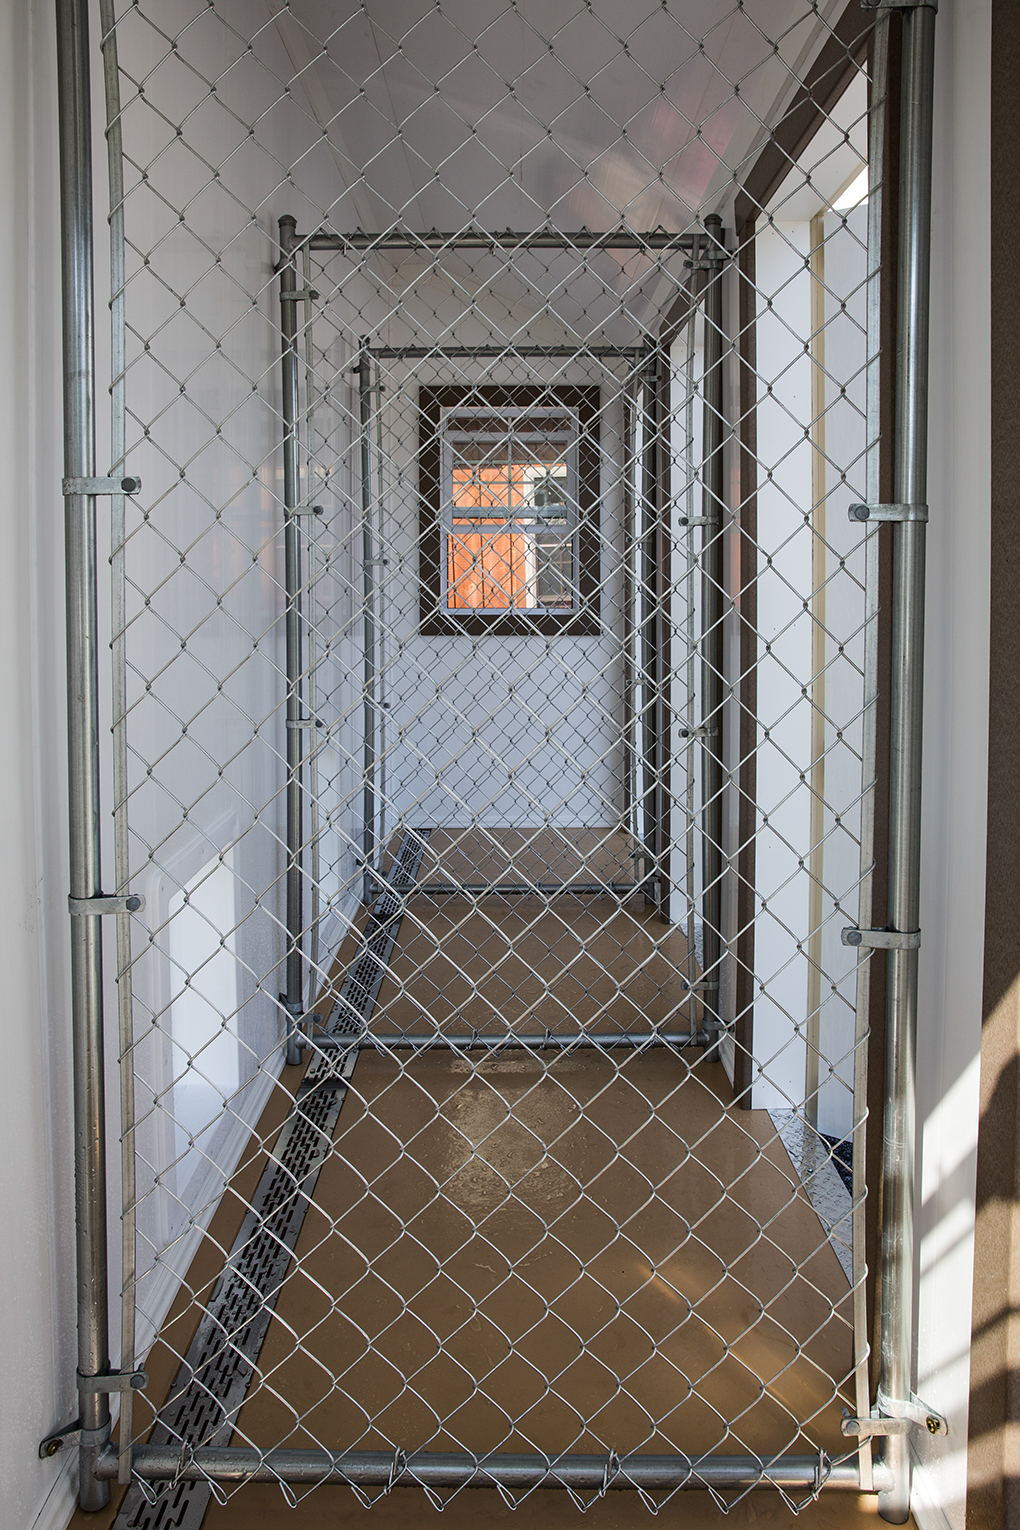 Interior of a 10x16 4 capacity kennel